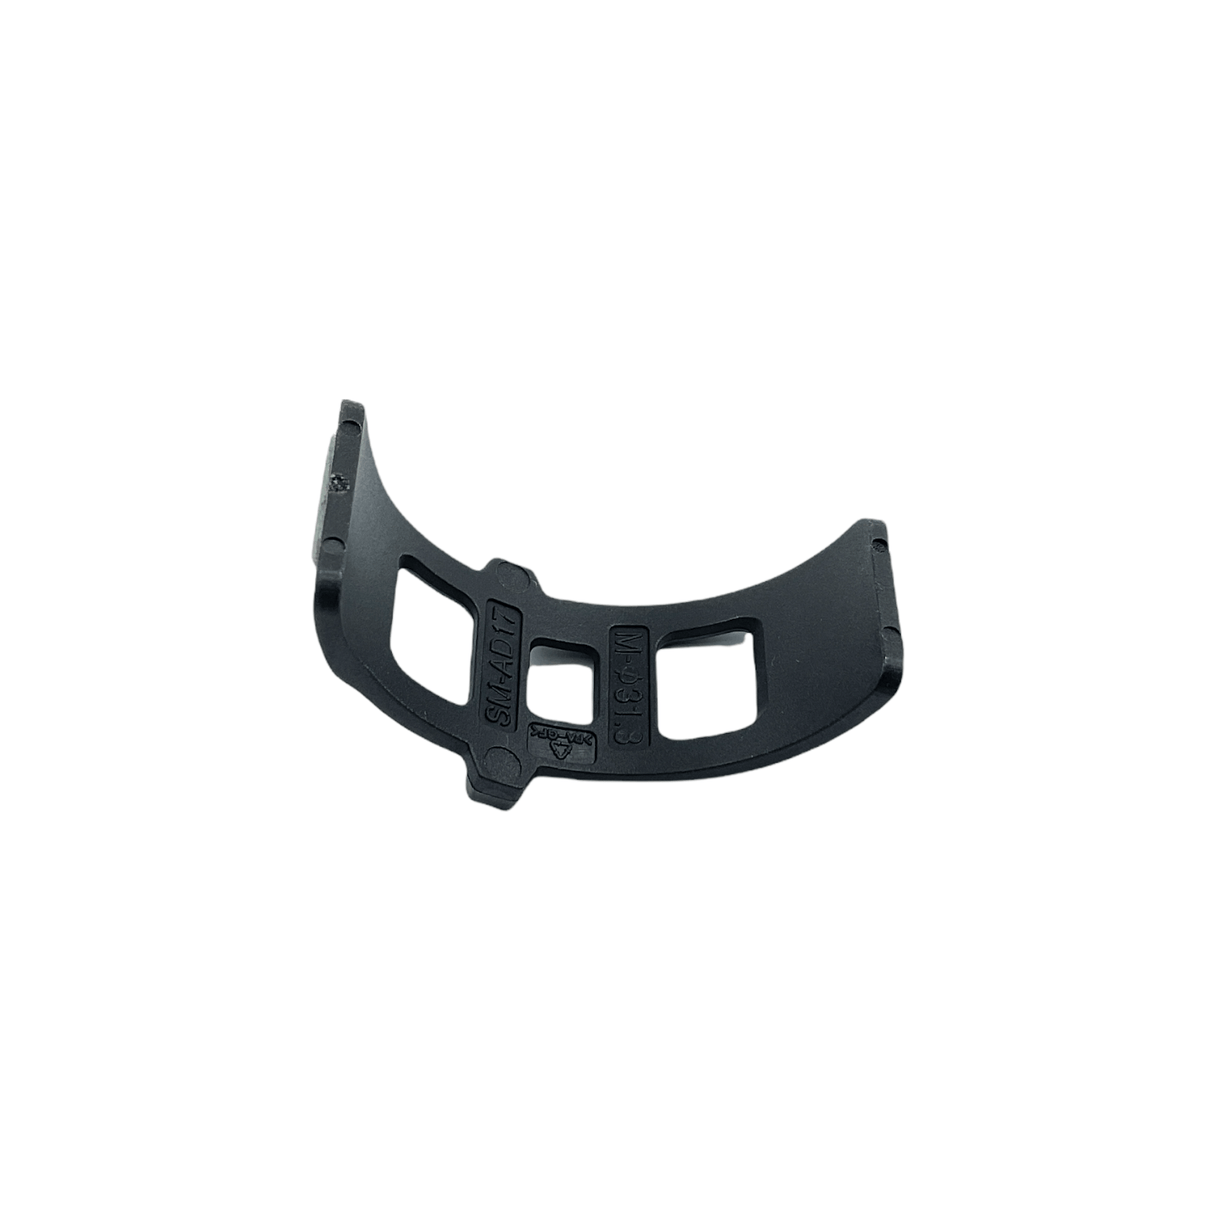 Shimano Spares SM-AD17-M clamp band adapters; 31.8 mm